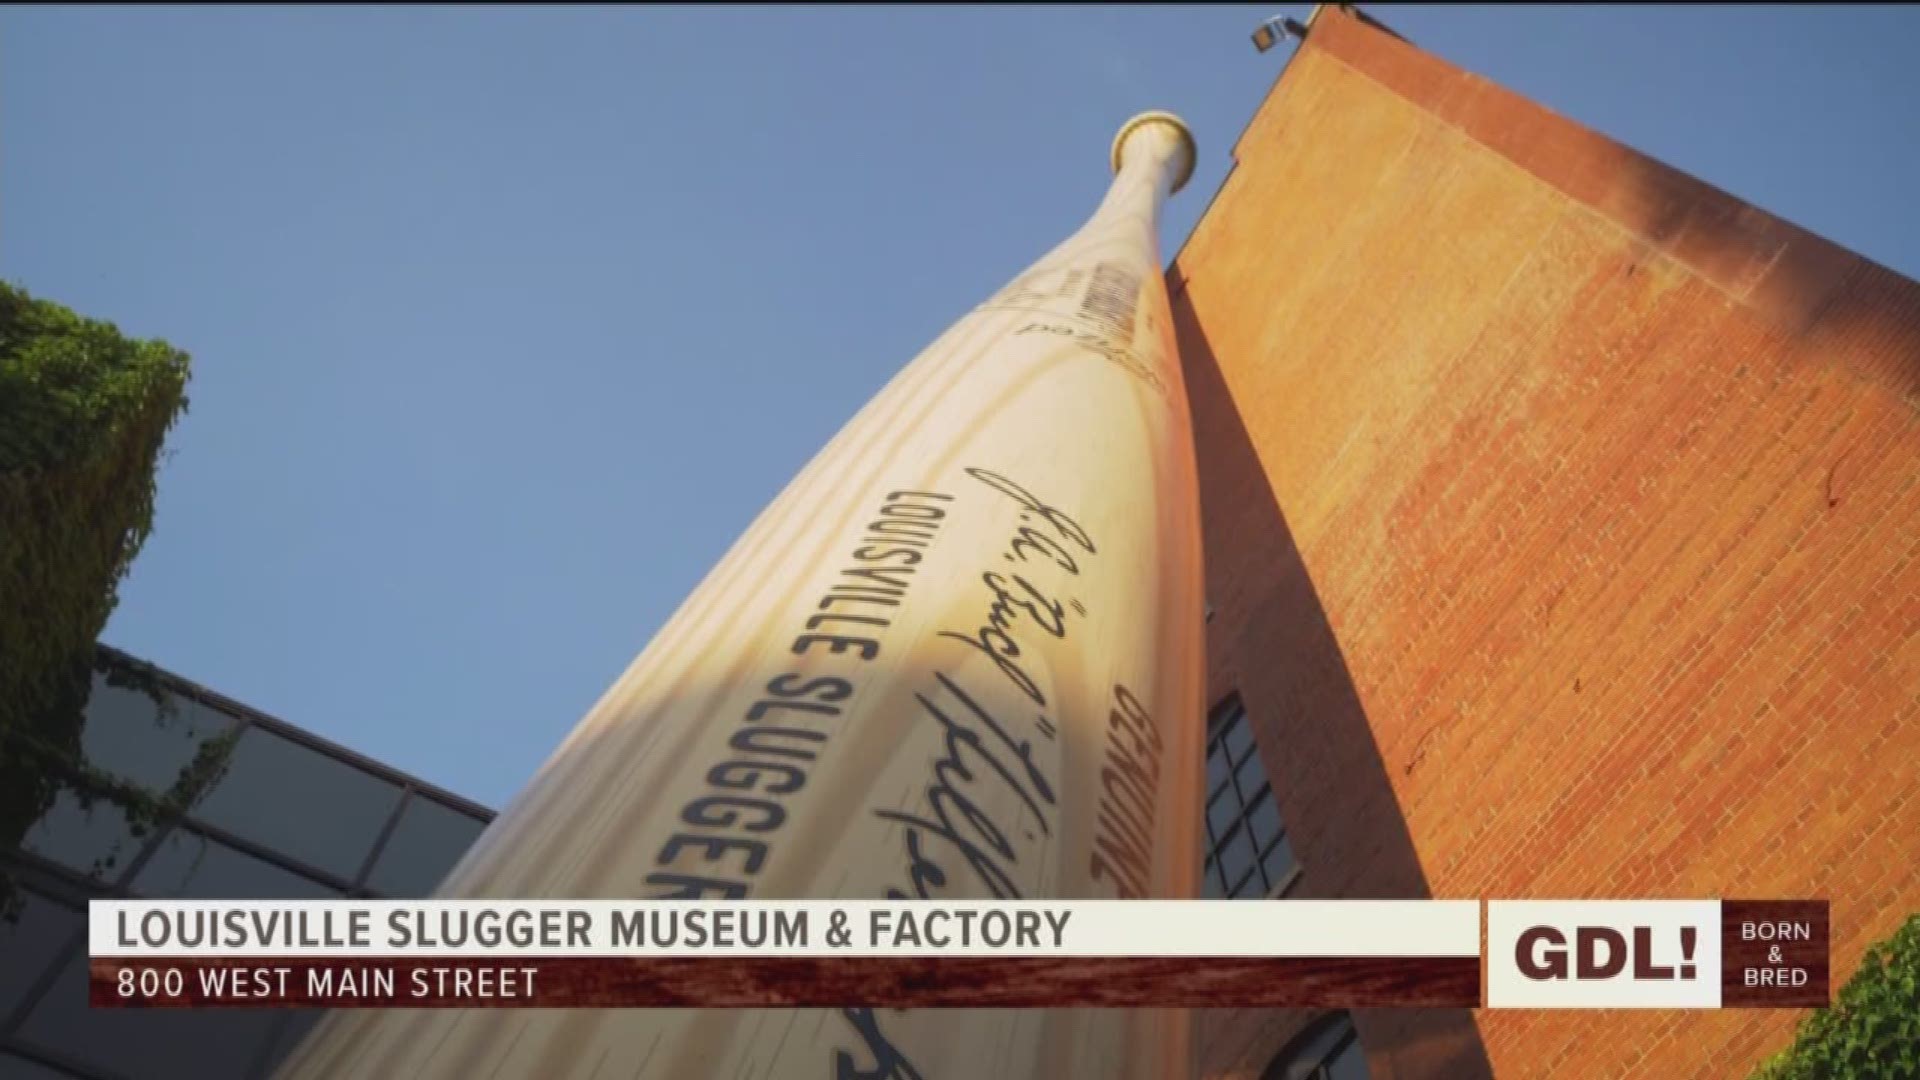 Anne Jewell is at the Louisville Slugger Museum & Factory to explain the world-famous baseball bat's history and evolution.